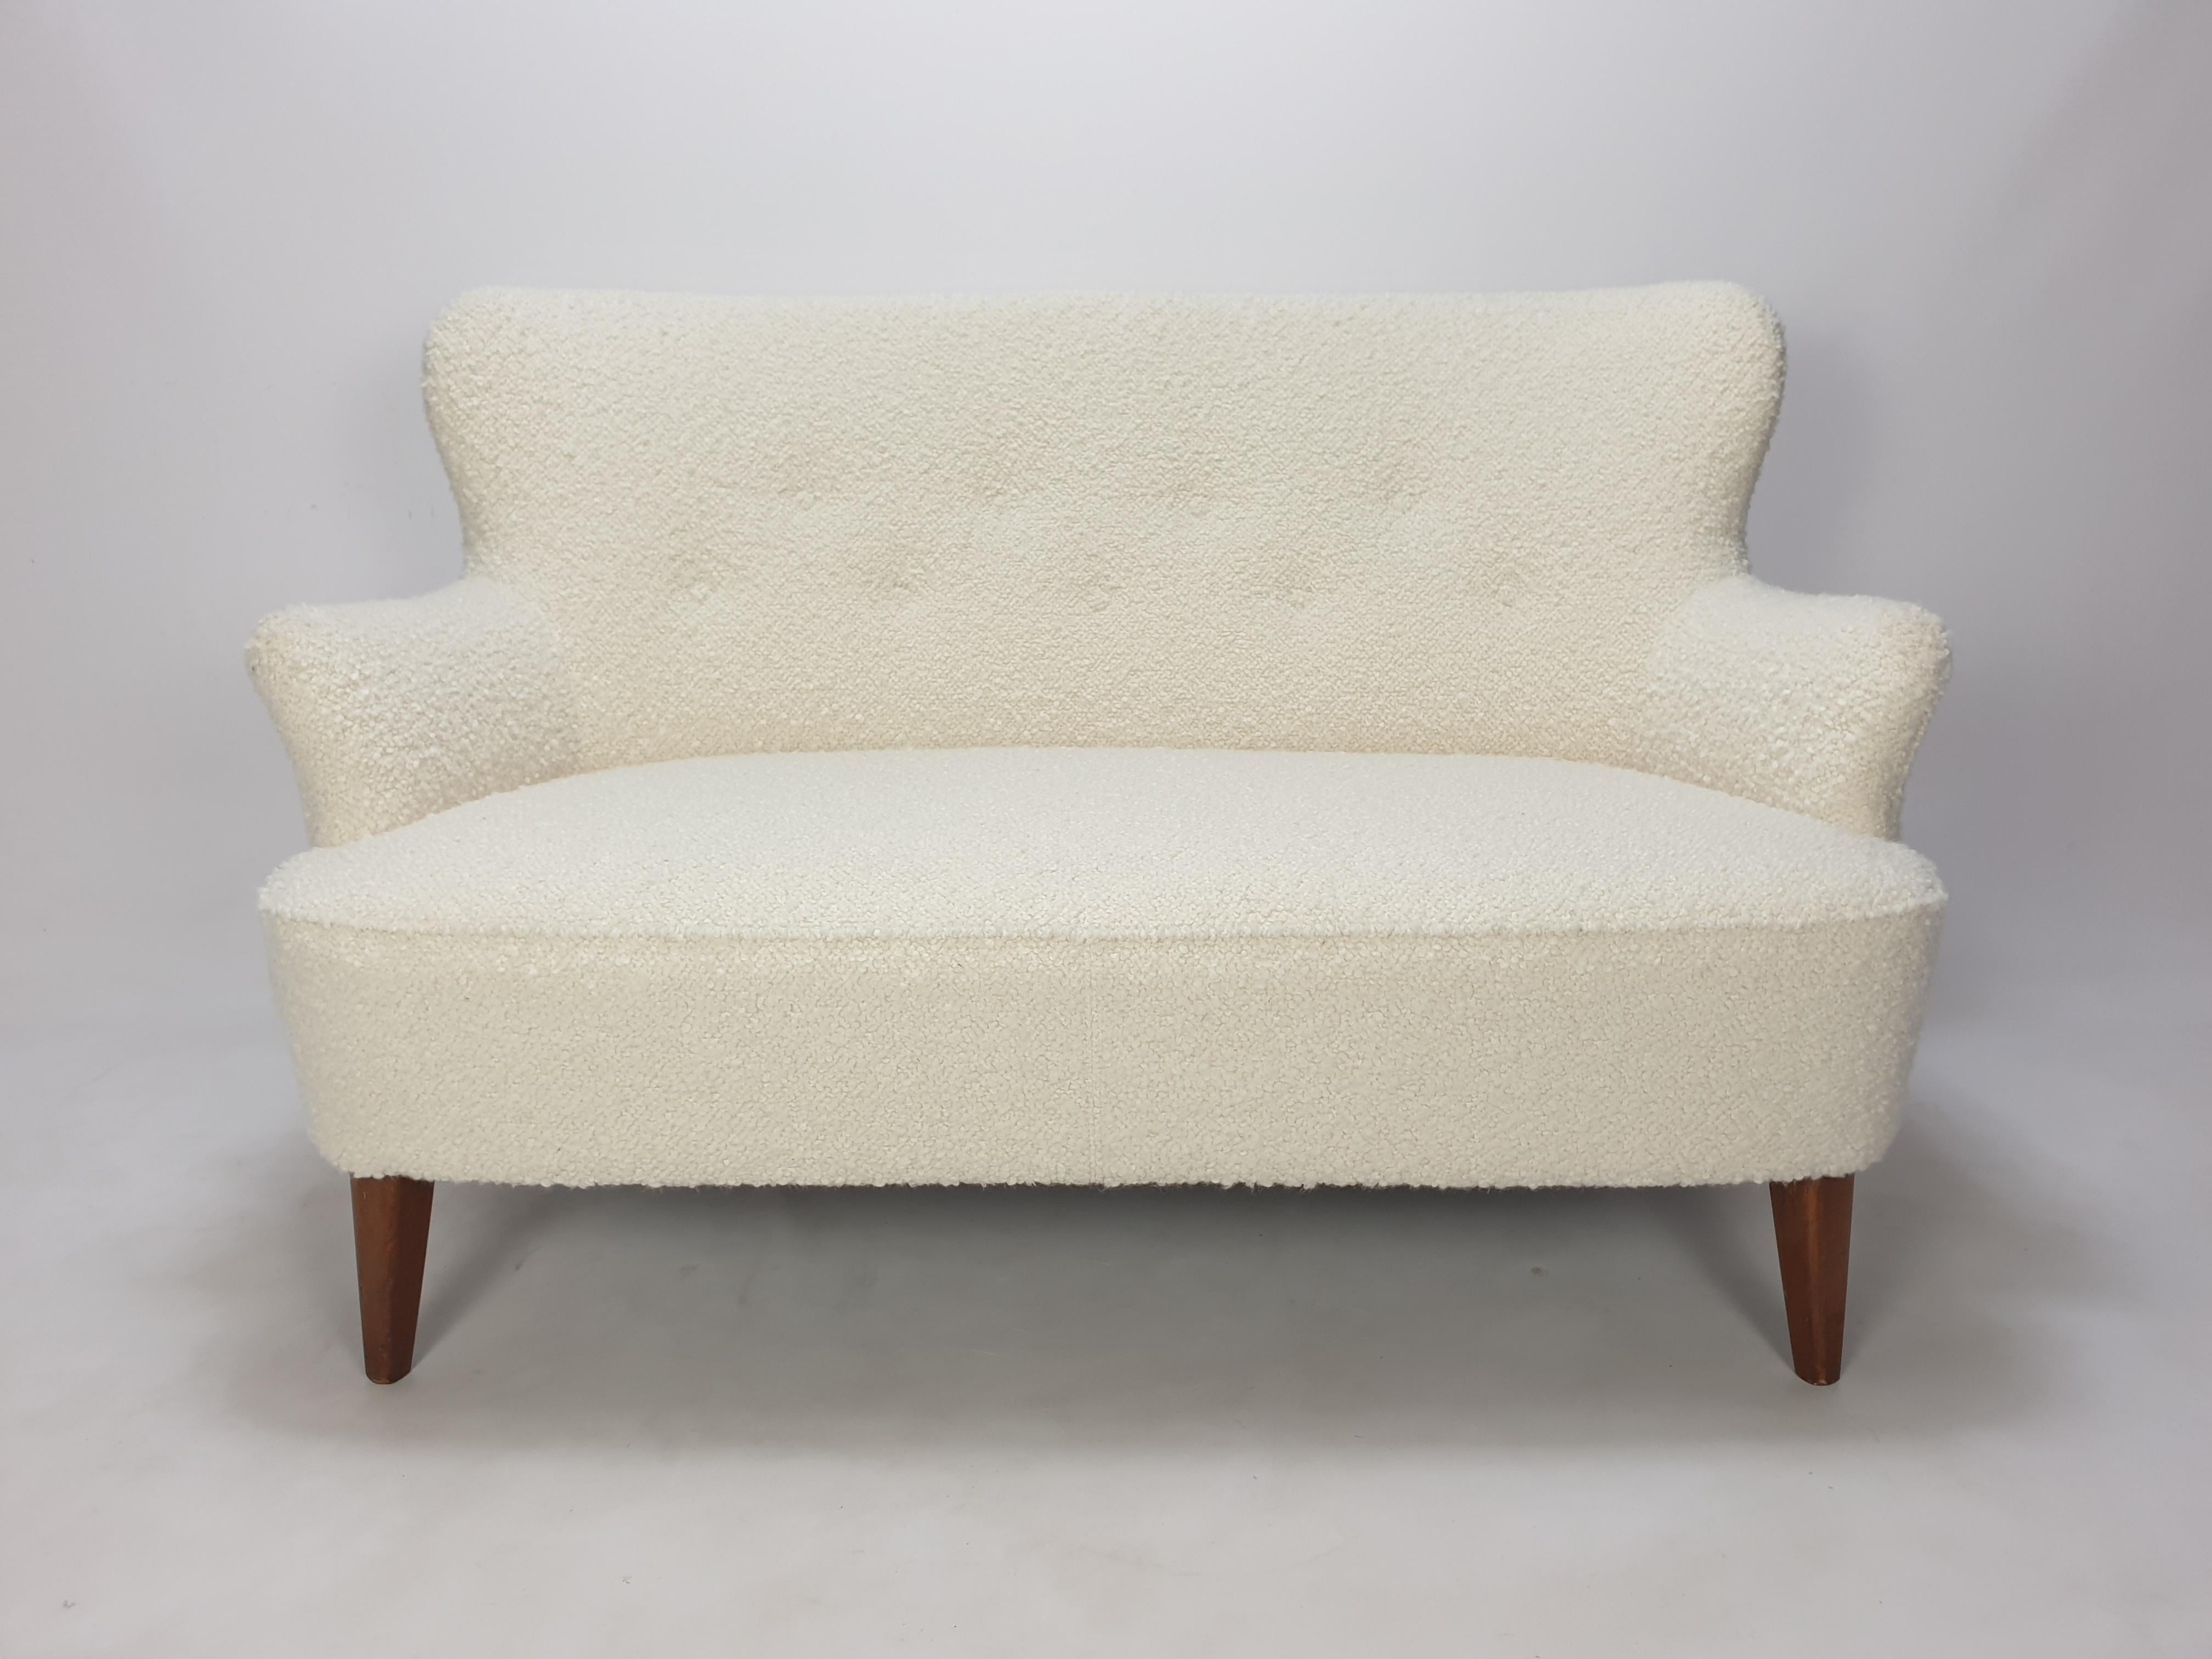 Stunning Mid-Century Modern 2-seat sofa, designed by Theo Ruth for Artifort in the 50s.

This lovely sofa is just restored with new Italian bouclé fabric, it is in perfect condition.
    